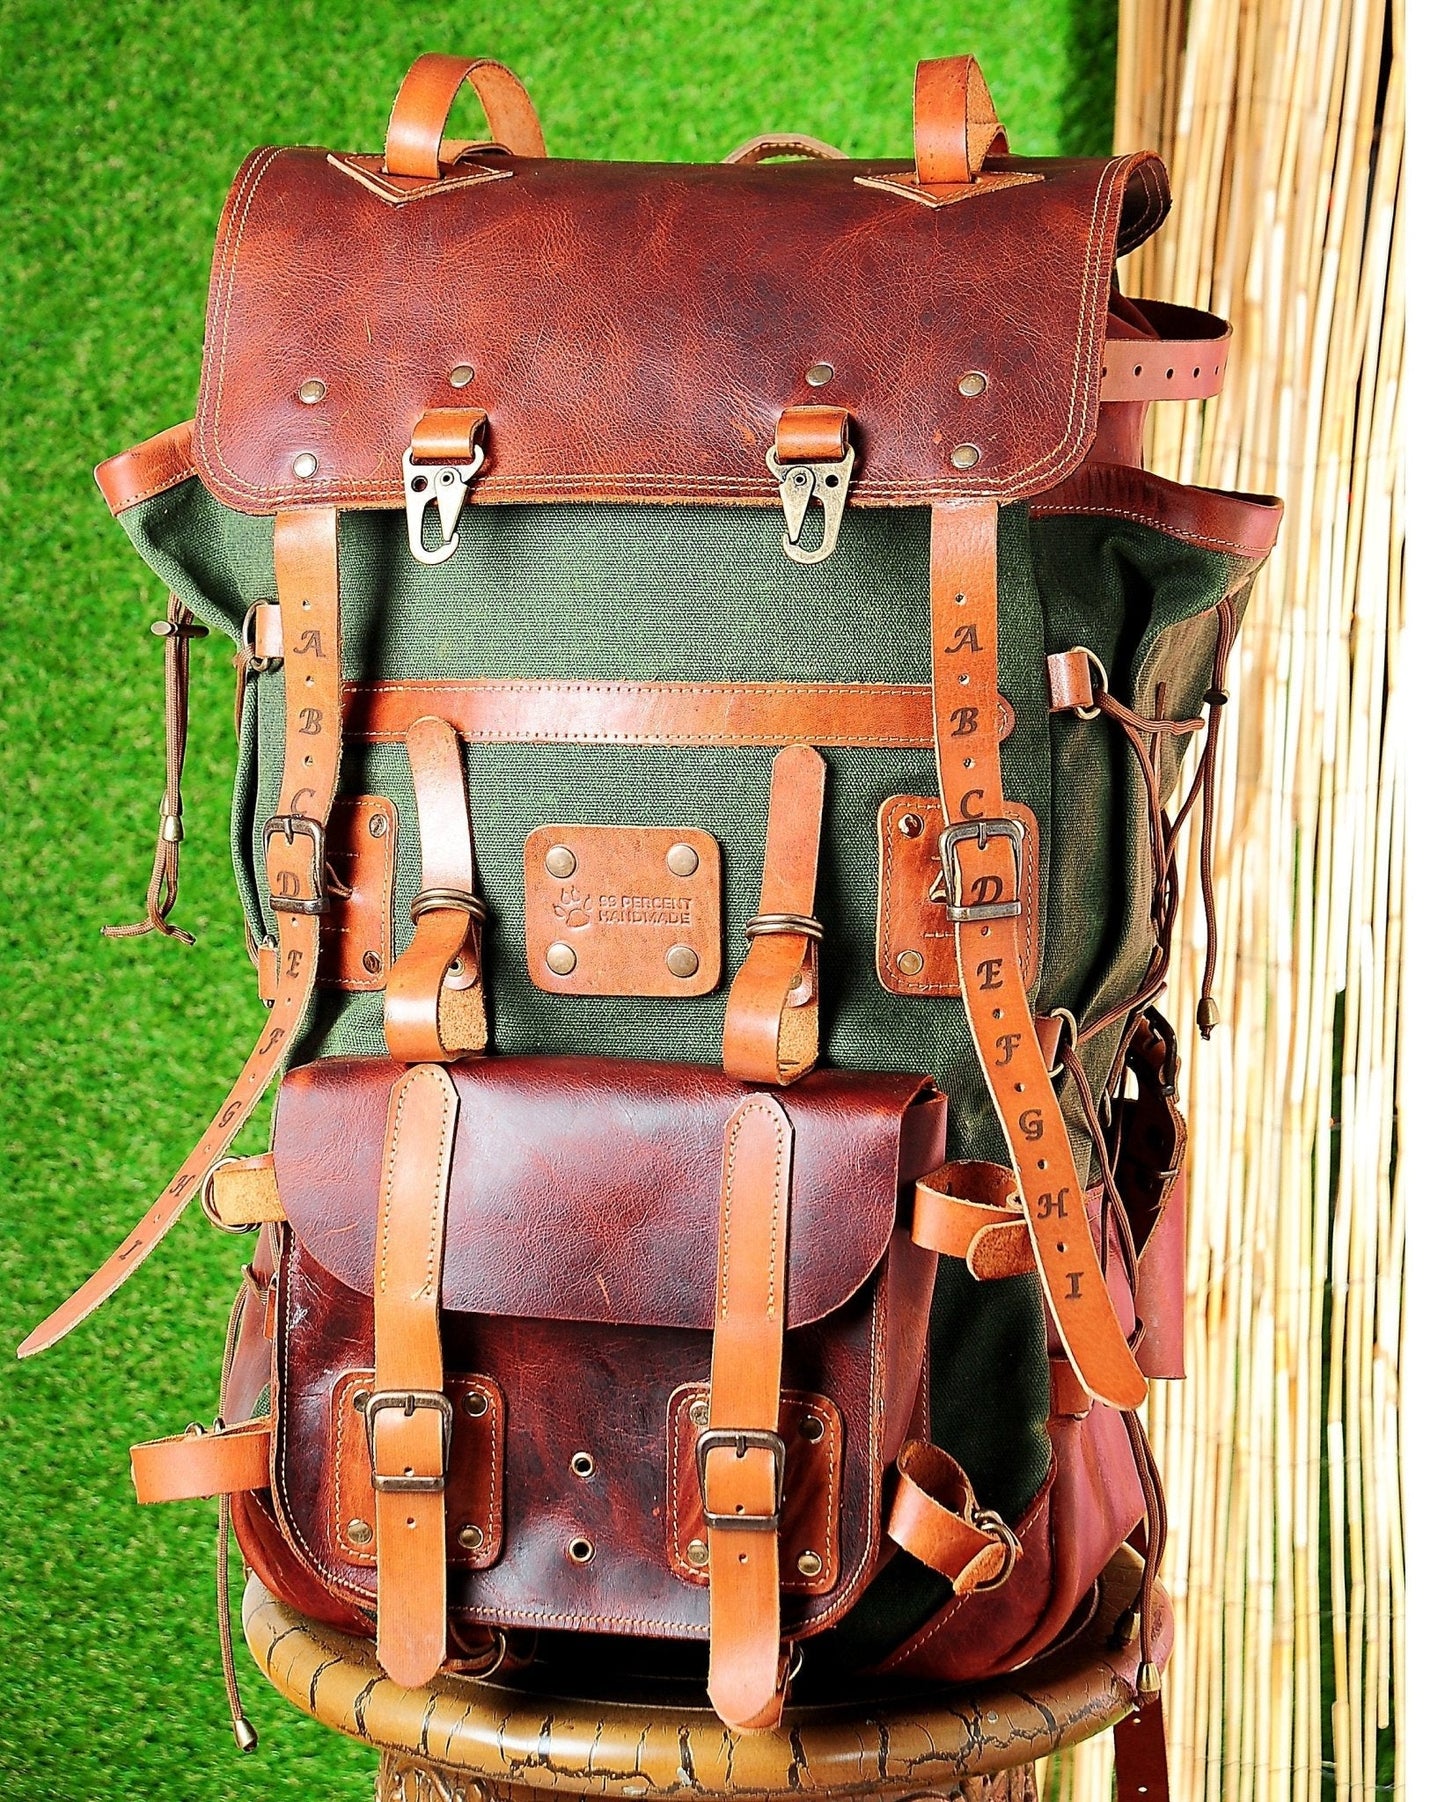 Camping Backpack | Camping Backpacks | Handmade Leather Backpack | Green | Waxed Canvas Backpack | Travel, Camping, Hiking | Personalization for your request bushcraft - camping - hiking backpack 99percenthandmade   